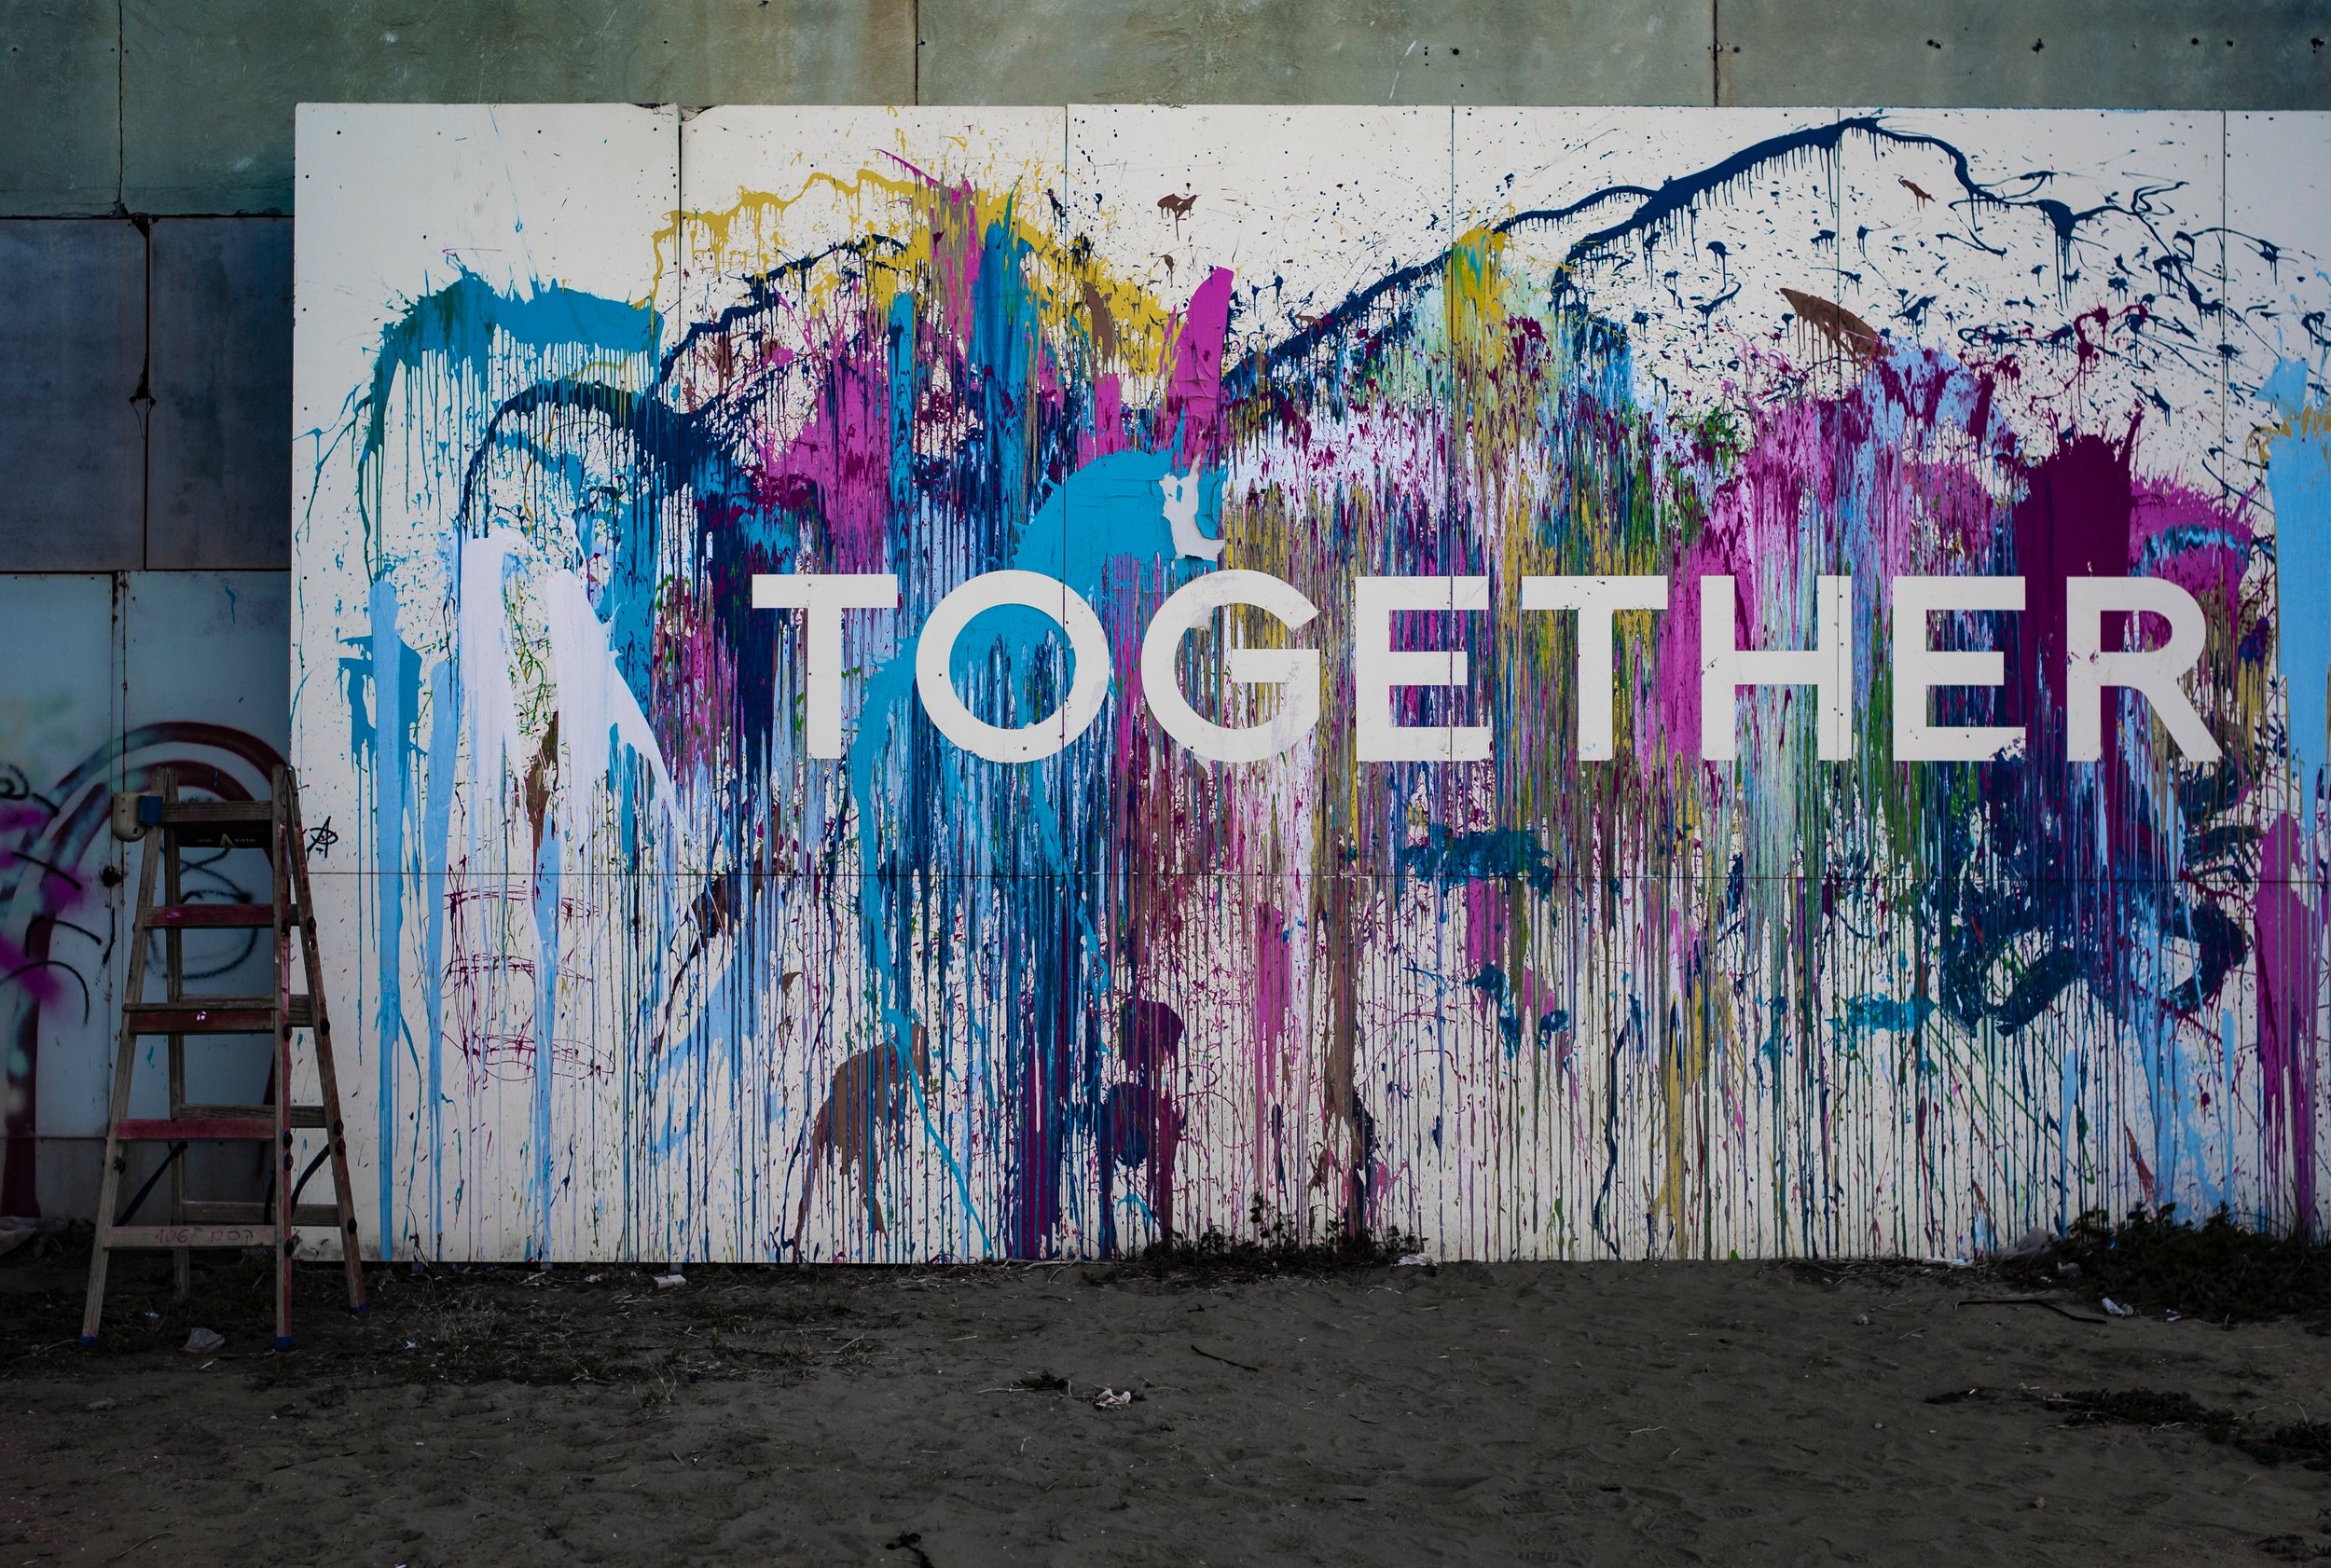 Cover image for “Working Together Through the Power of One”